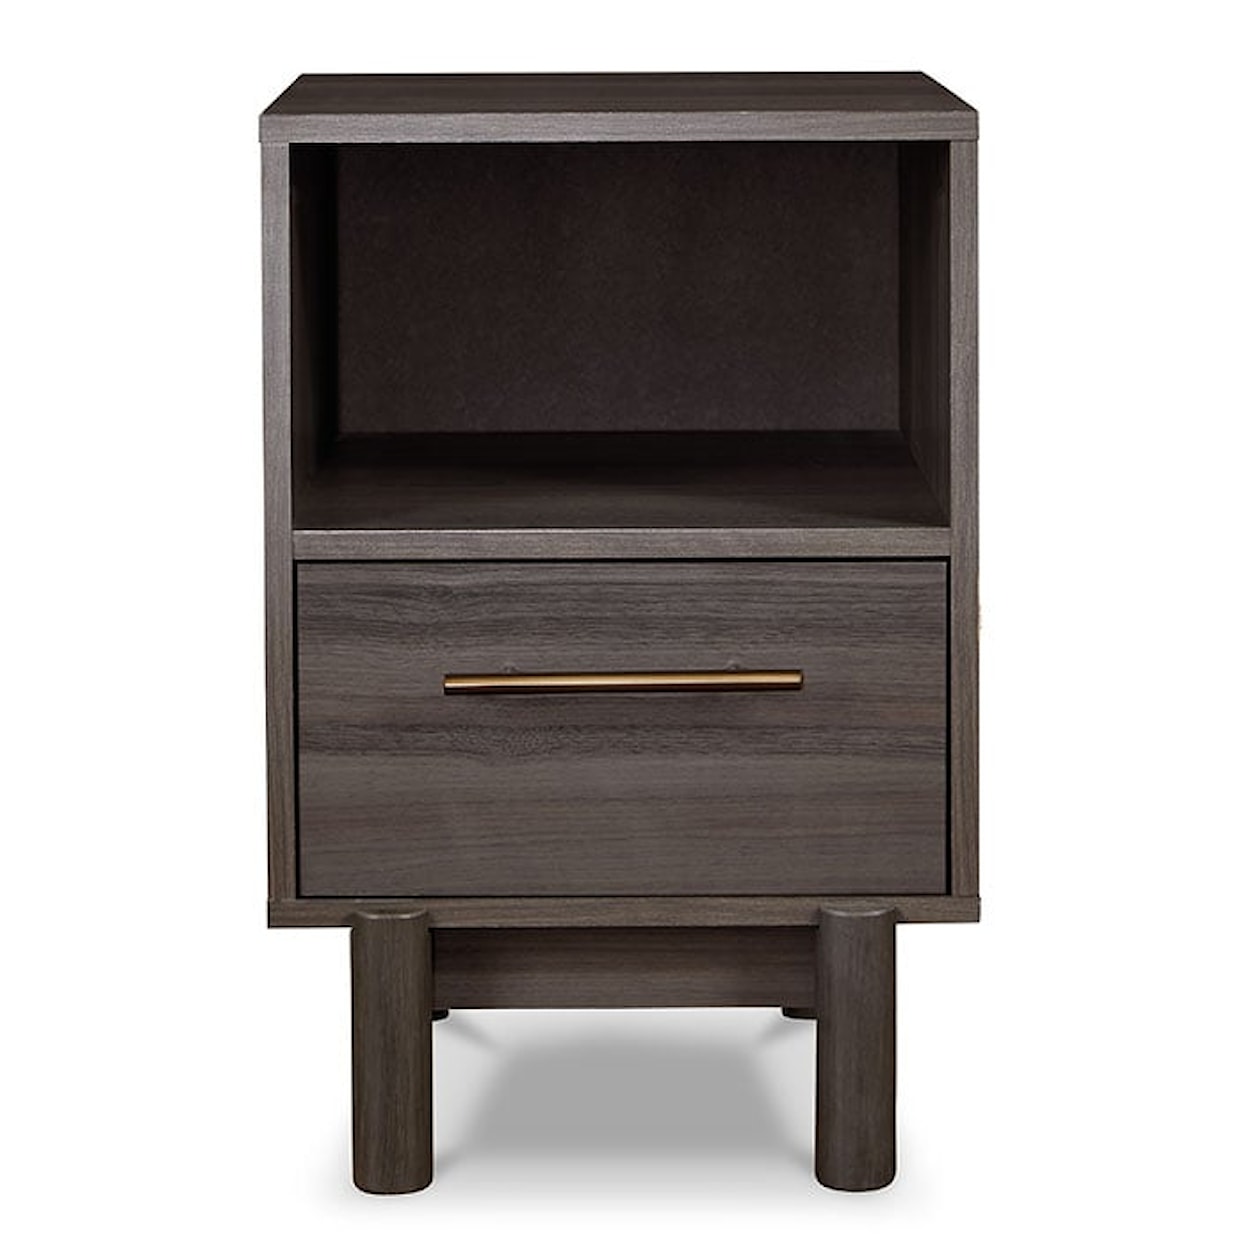 Signature Design by Ashley Brymont Nightstand